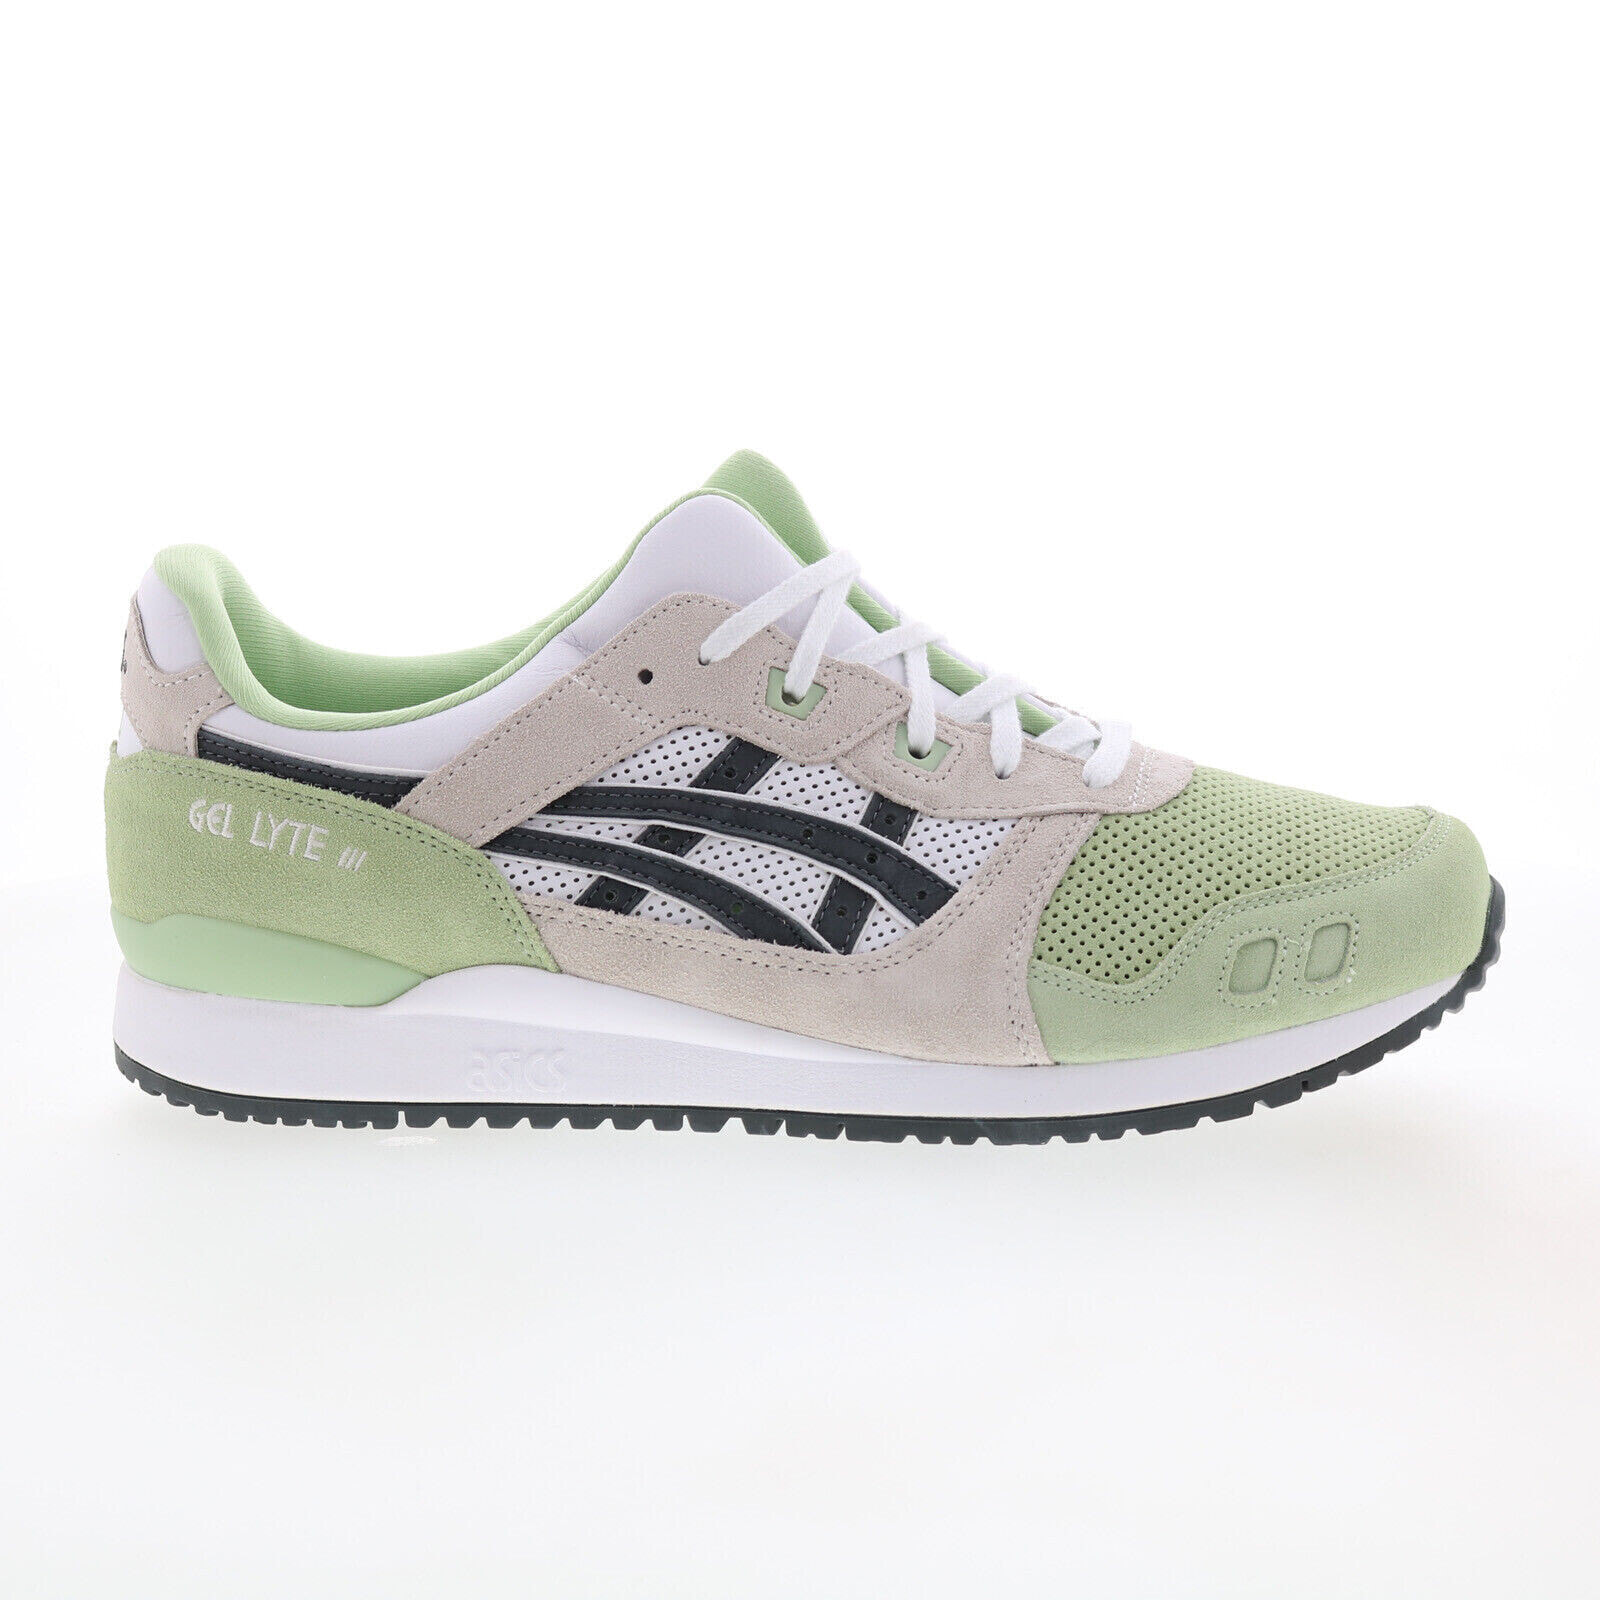 Asics Gel-Lyte III OG 1201A762-300 Mens Green Suede Lifestyle Sneakers Shoes 13